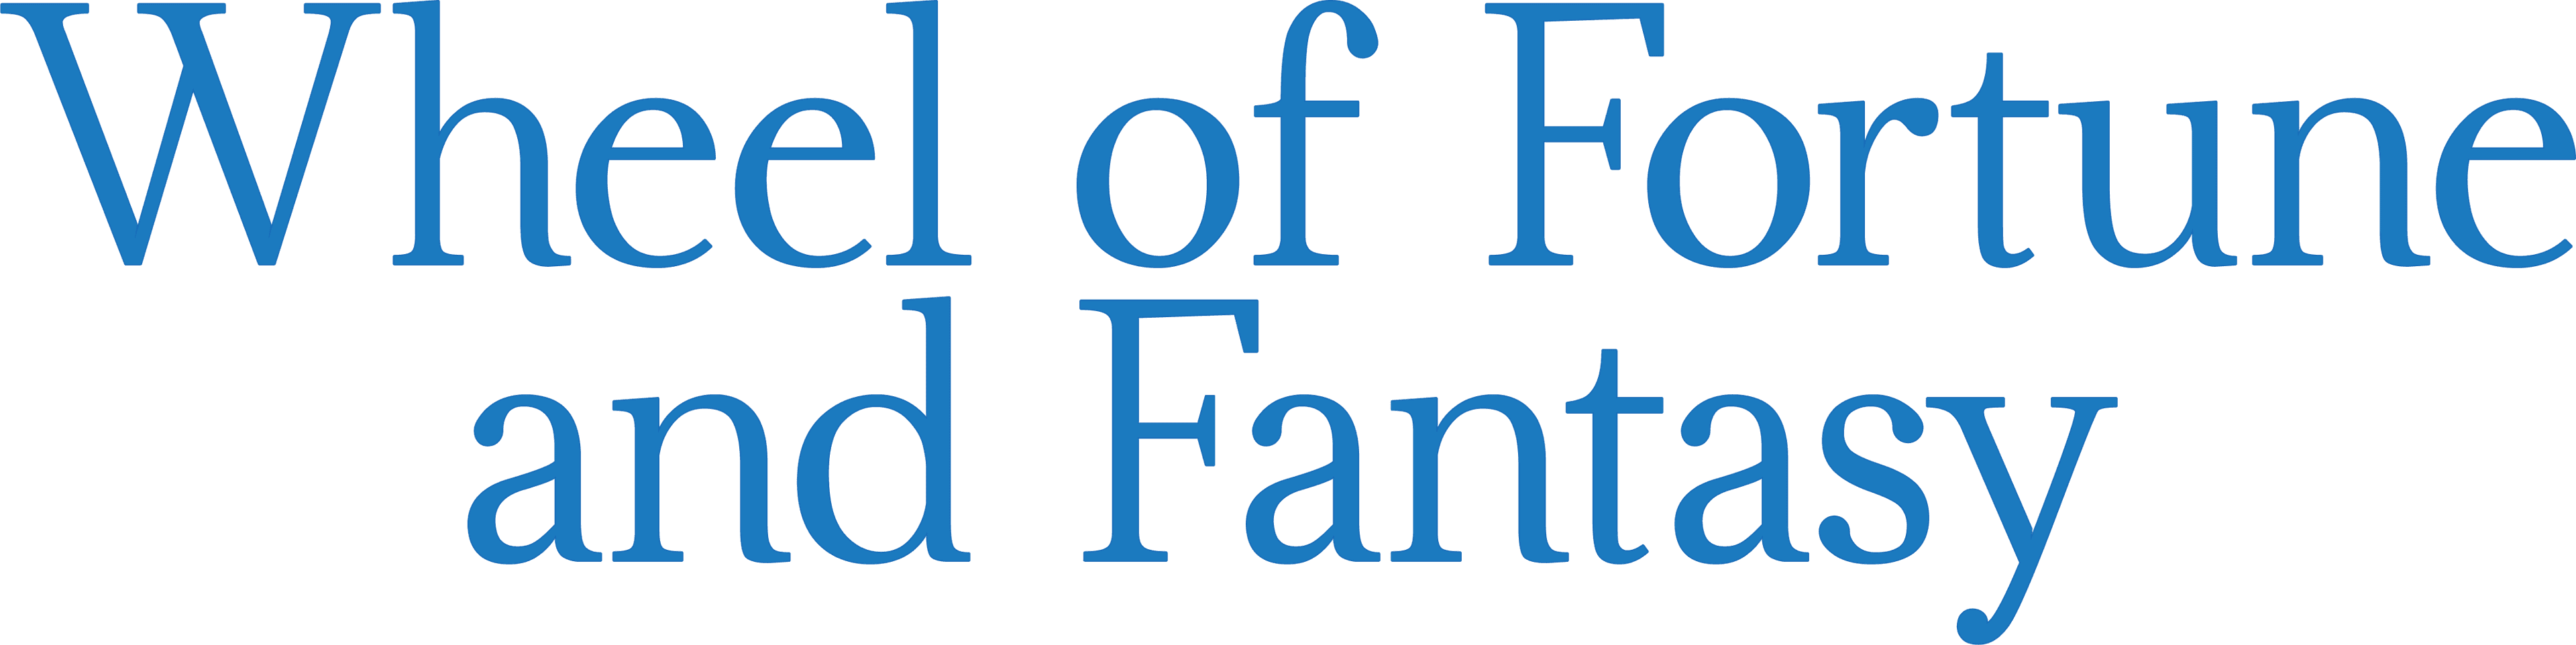 Wheel of Fortune and Fantasy logo